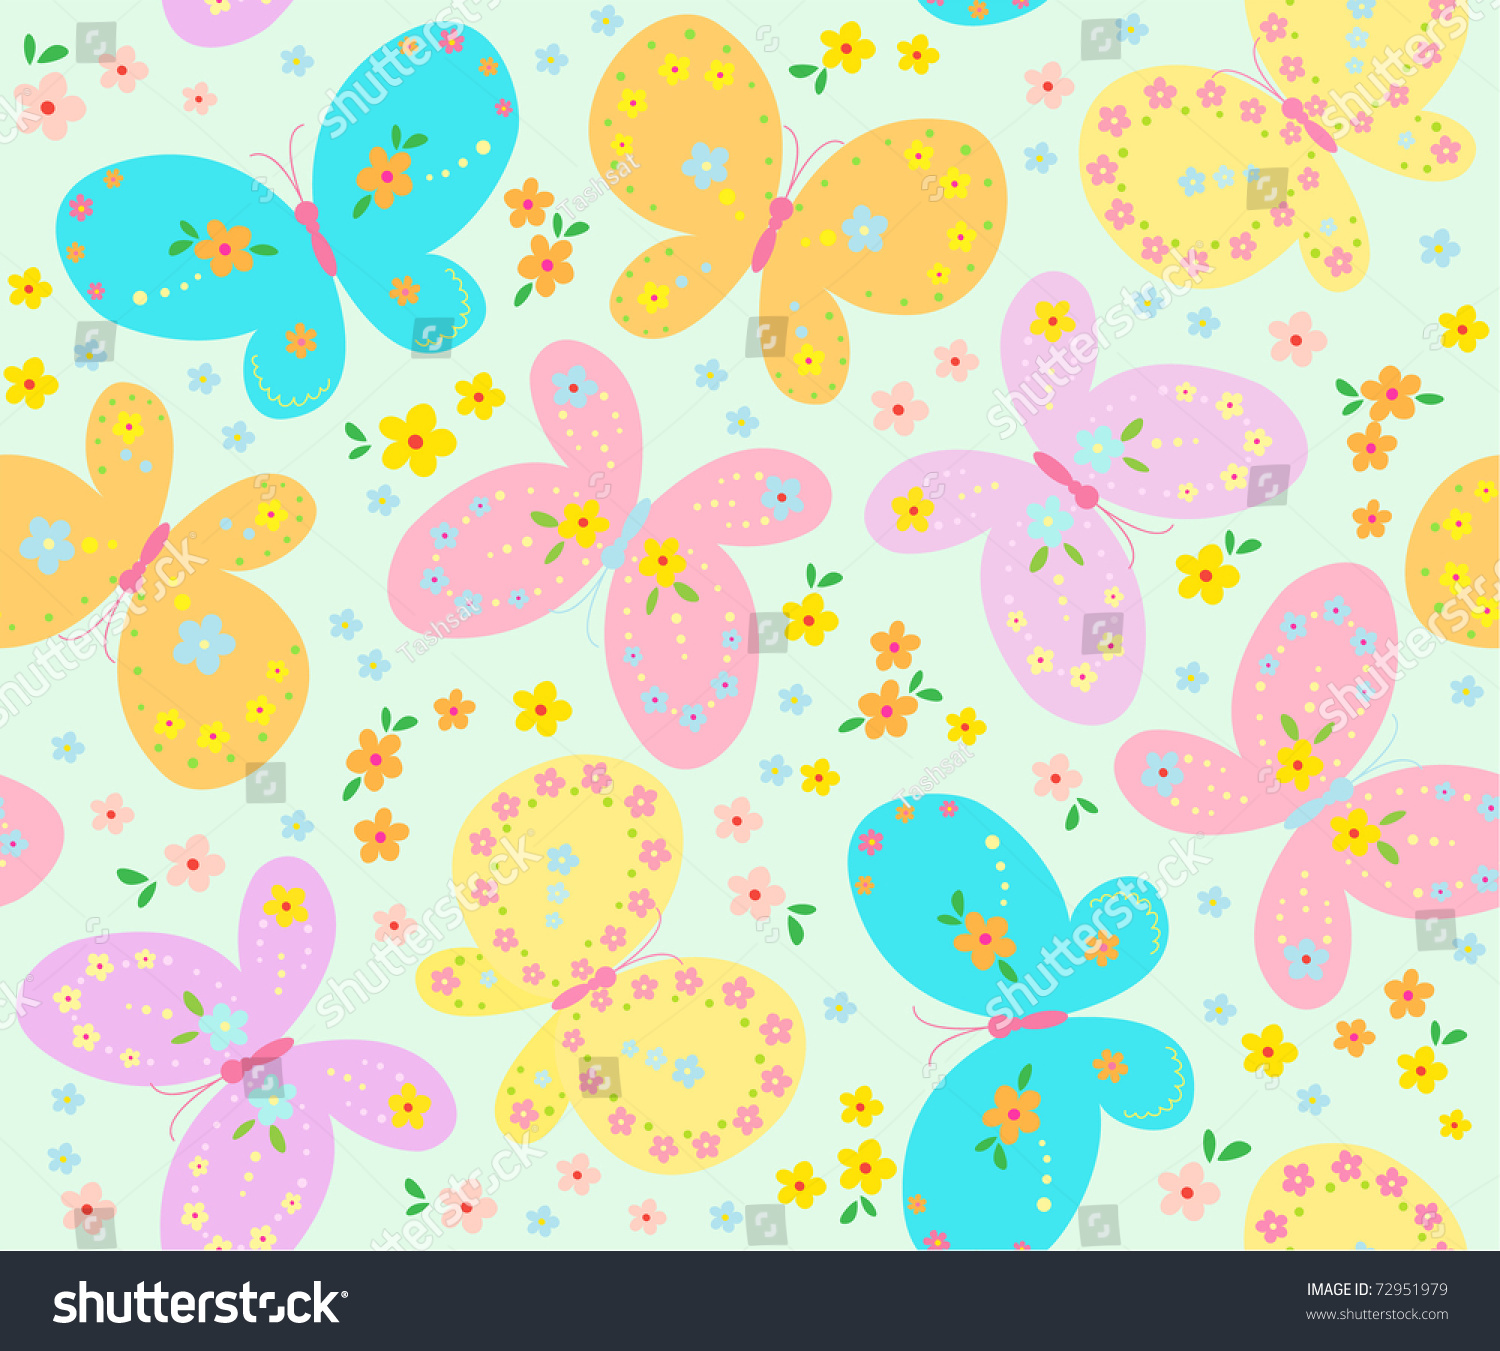 Background With Butterfly Stock Vector Illustration 72951979 : Shutterstock